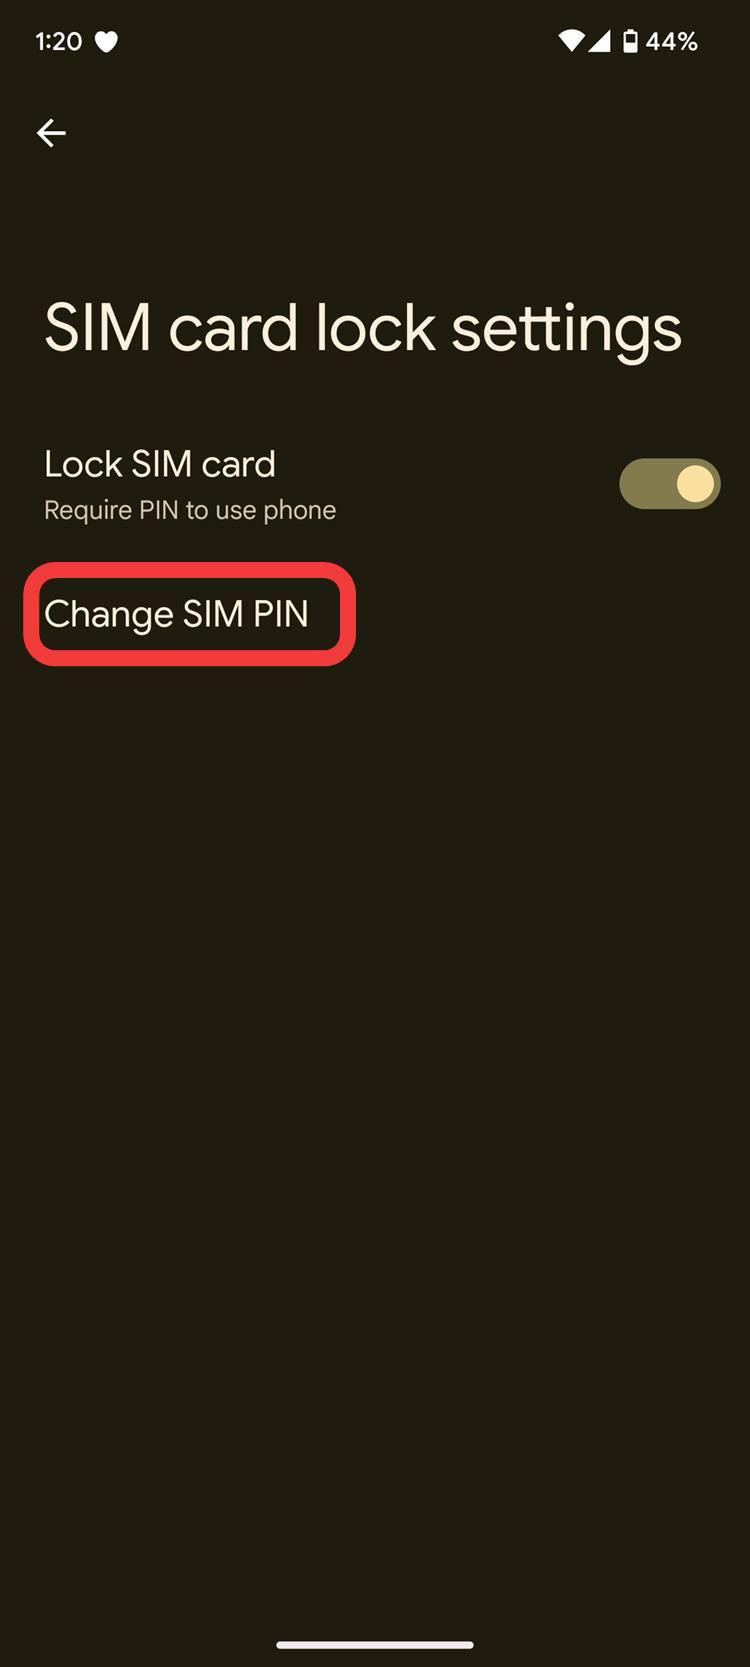 SIM card lock settings on a Pixel phone with a red box around the Change SIM PIN option